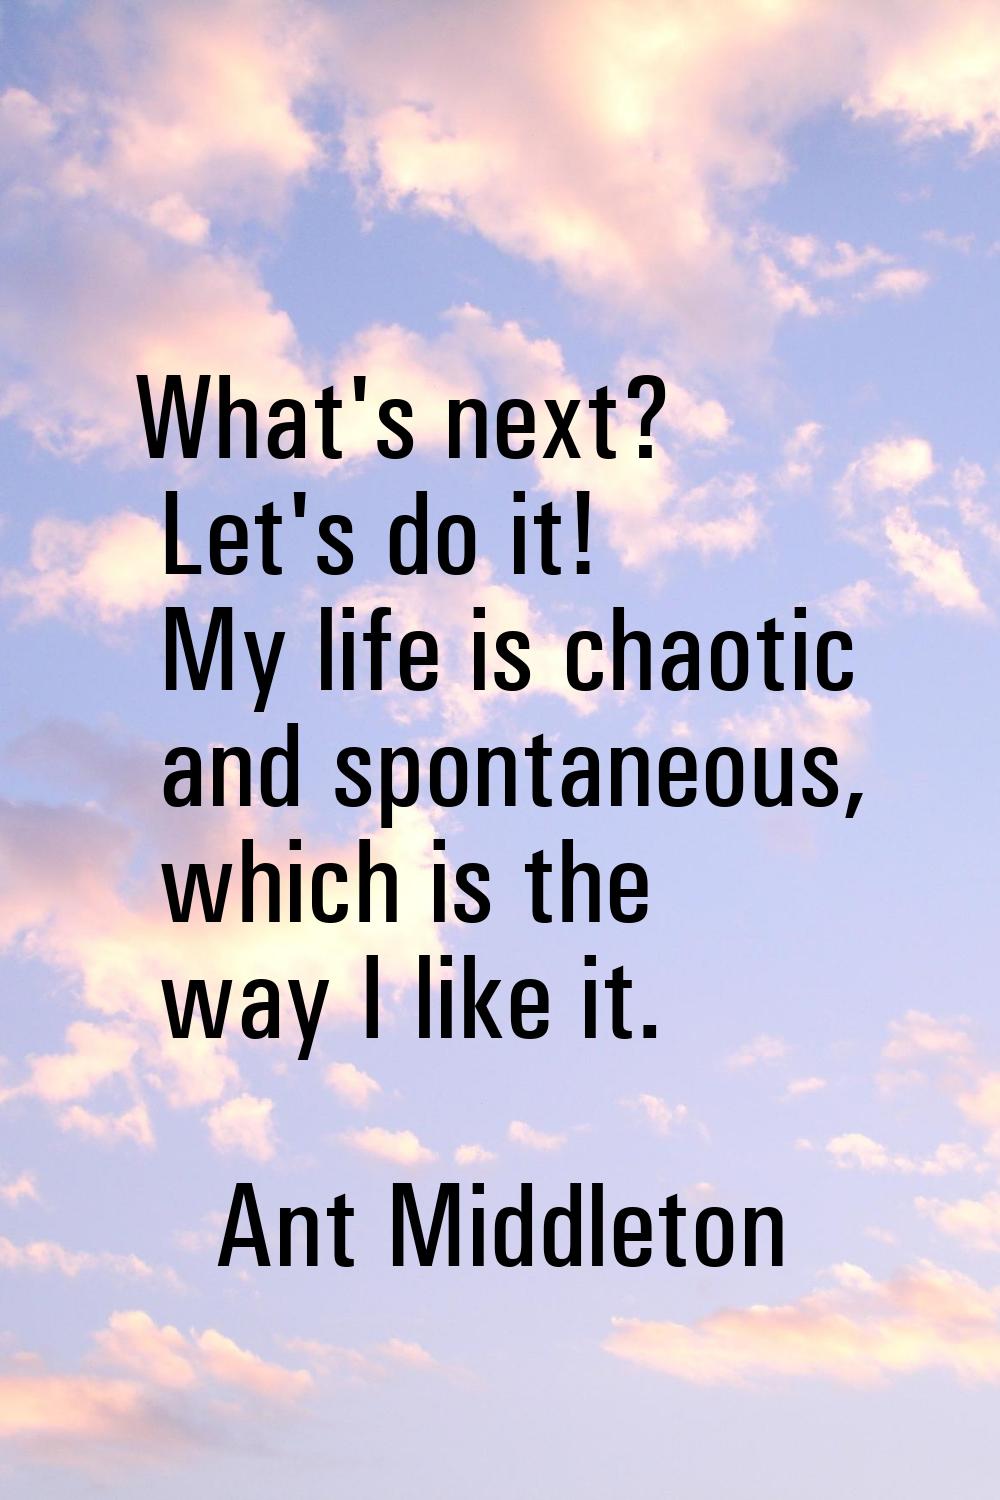 What's next? Let's do it! My life is chaotic and spontaneous, which is the way I like it.